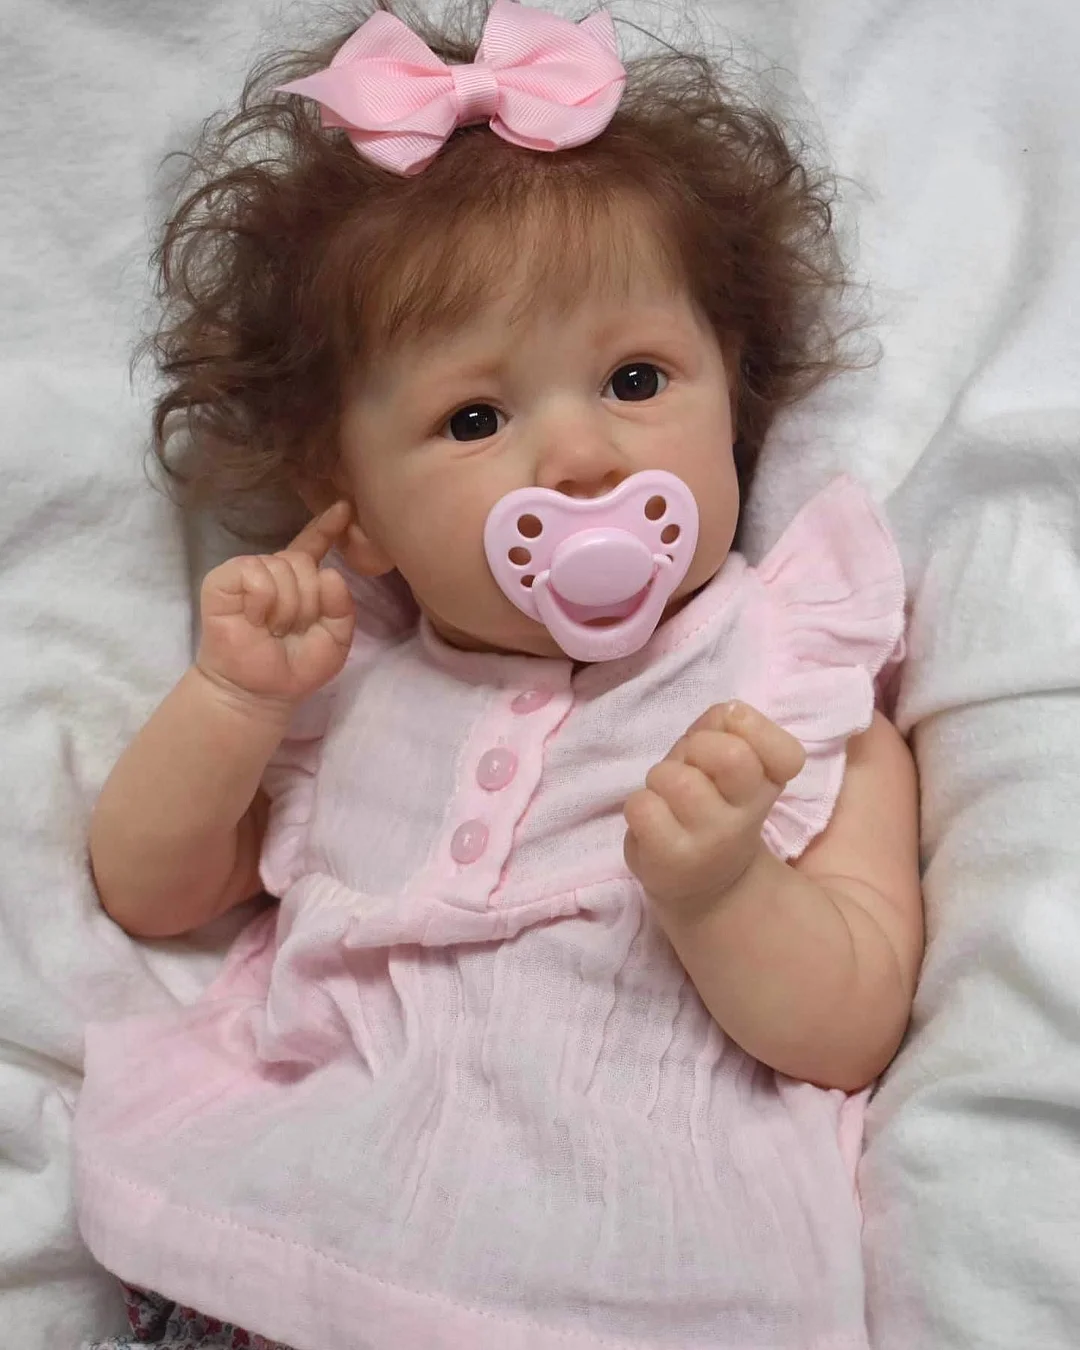 [NEW!] 20'' Reborn Girl Baby Doll Alexandra, Toddler Babies Unique Gift Set for Loved One with "Heartbeat" and Sound